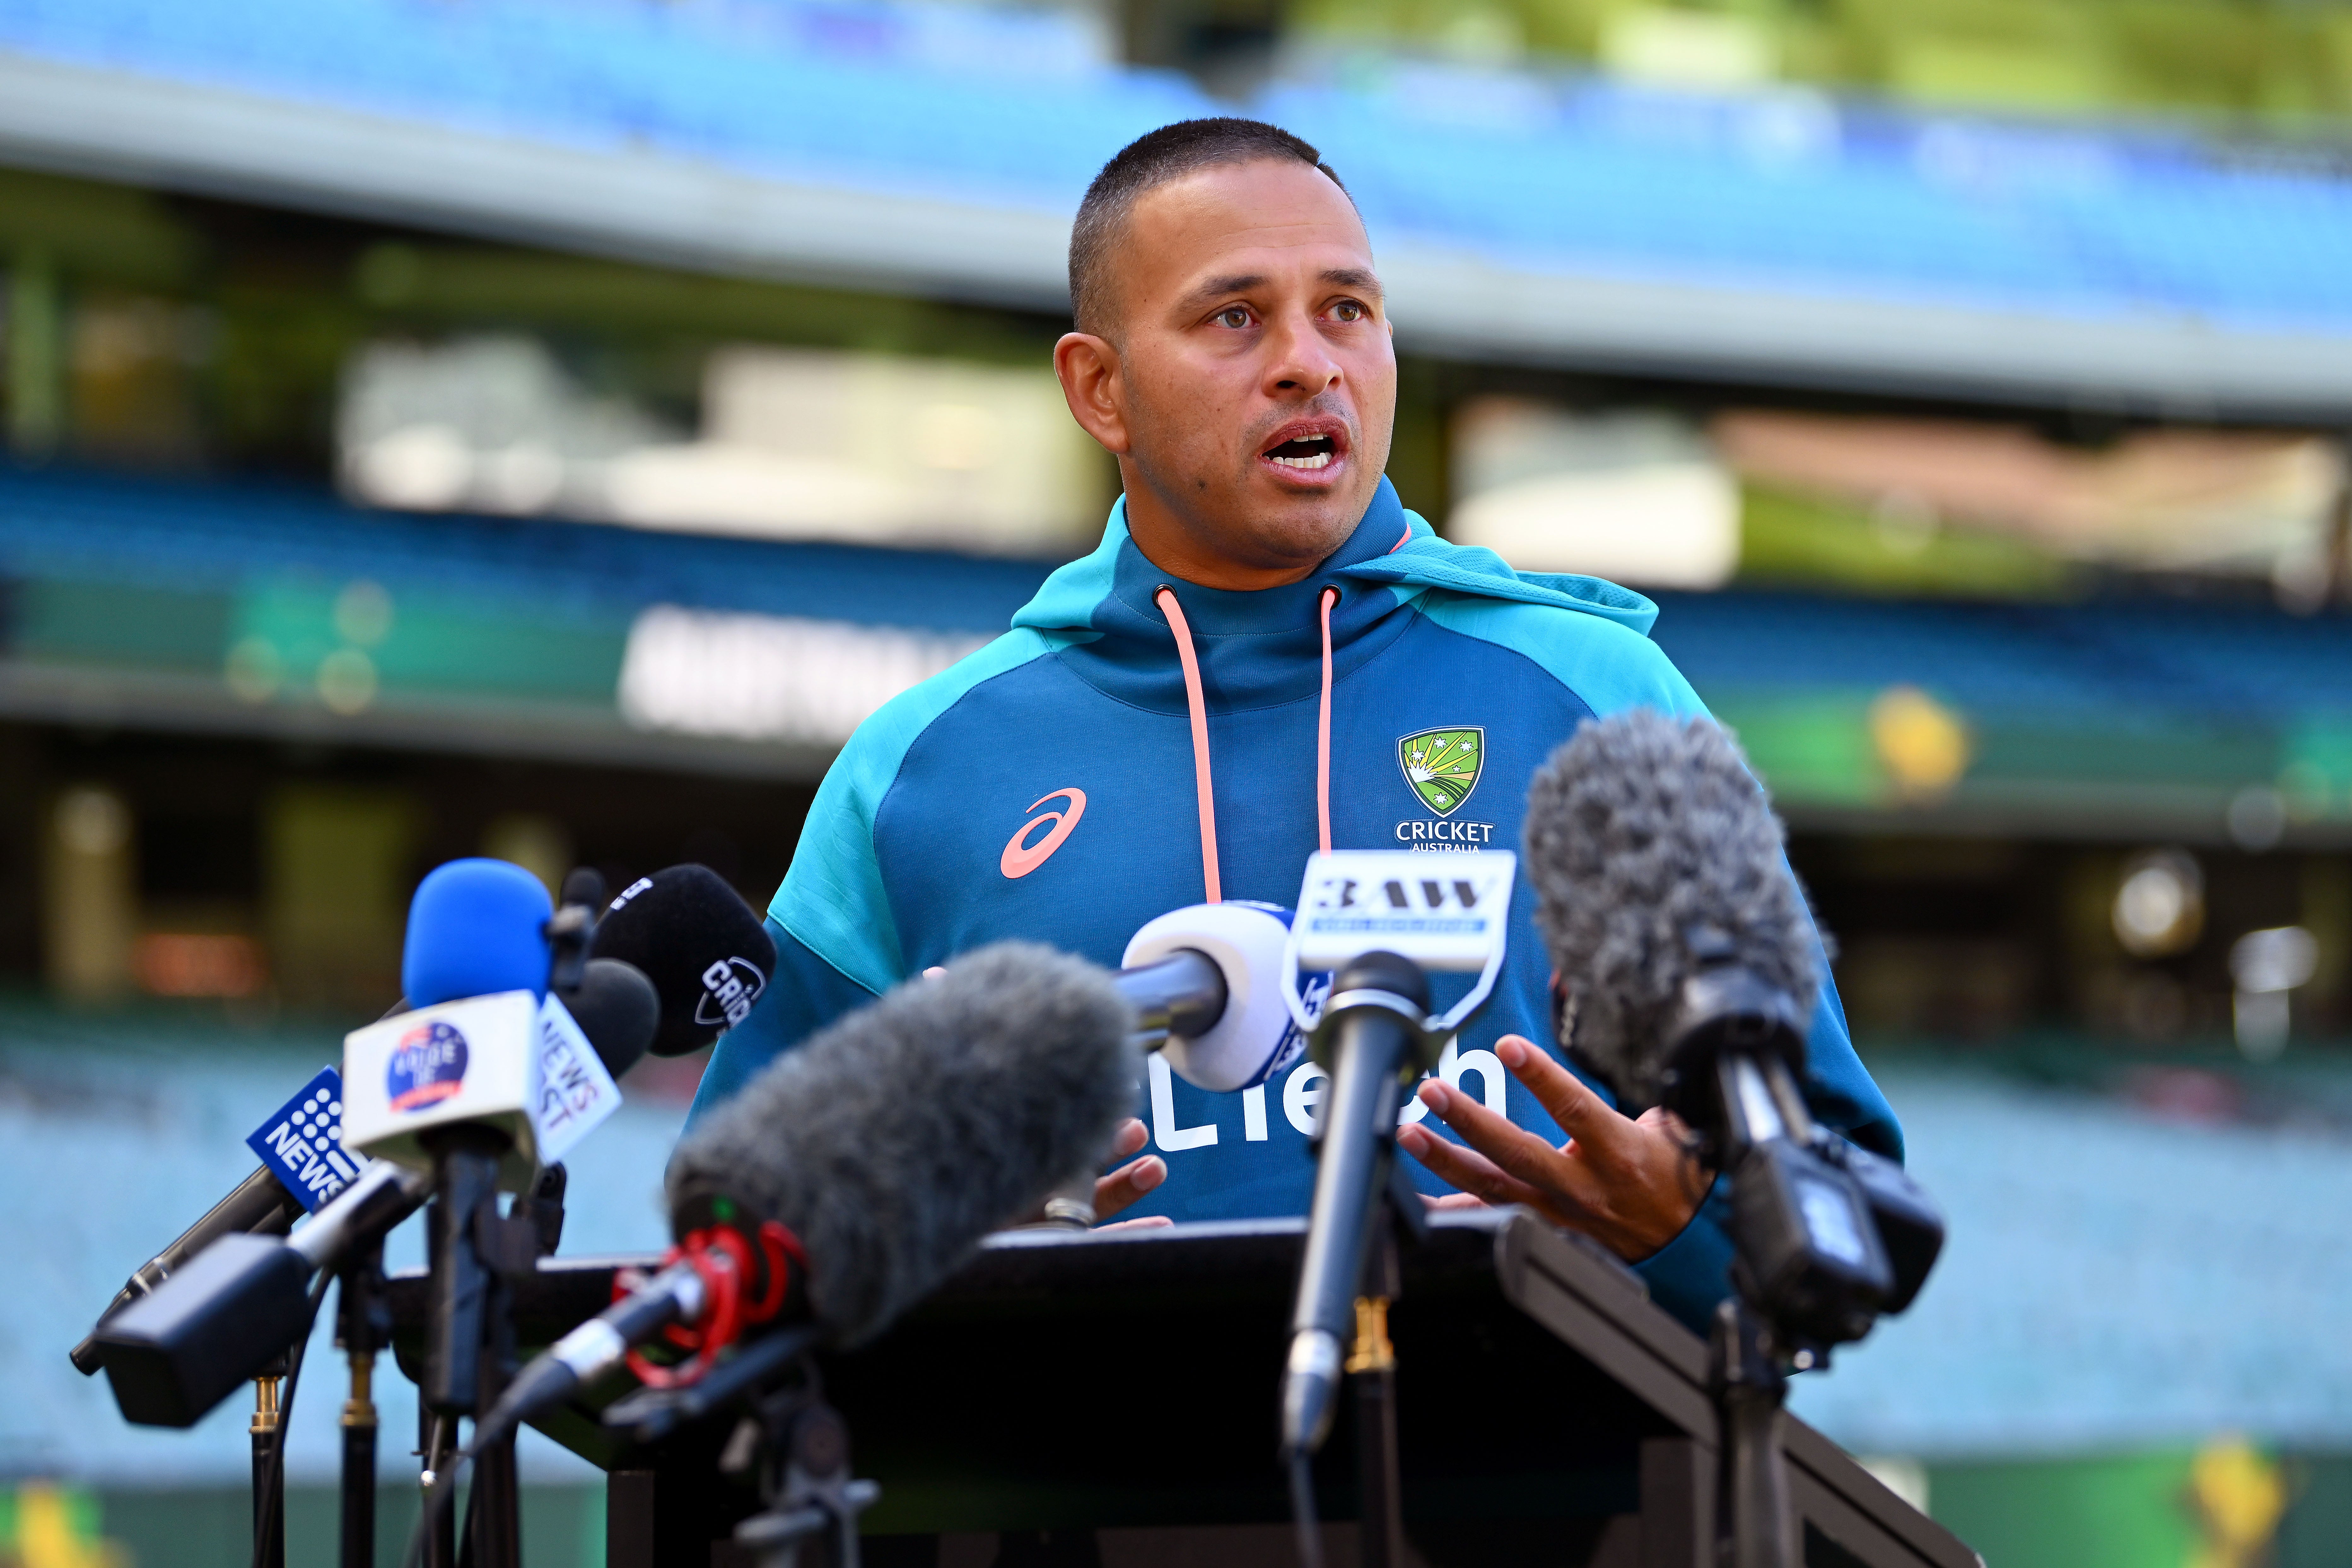 Khawaja spoke to reporters in Melbourne ahead of the second Test